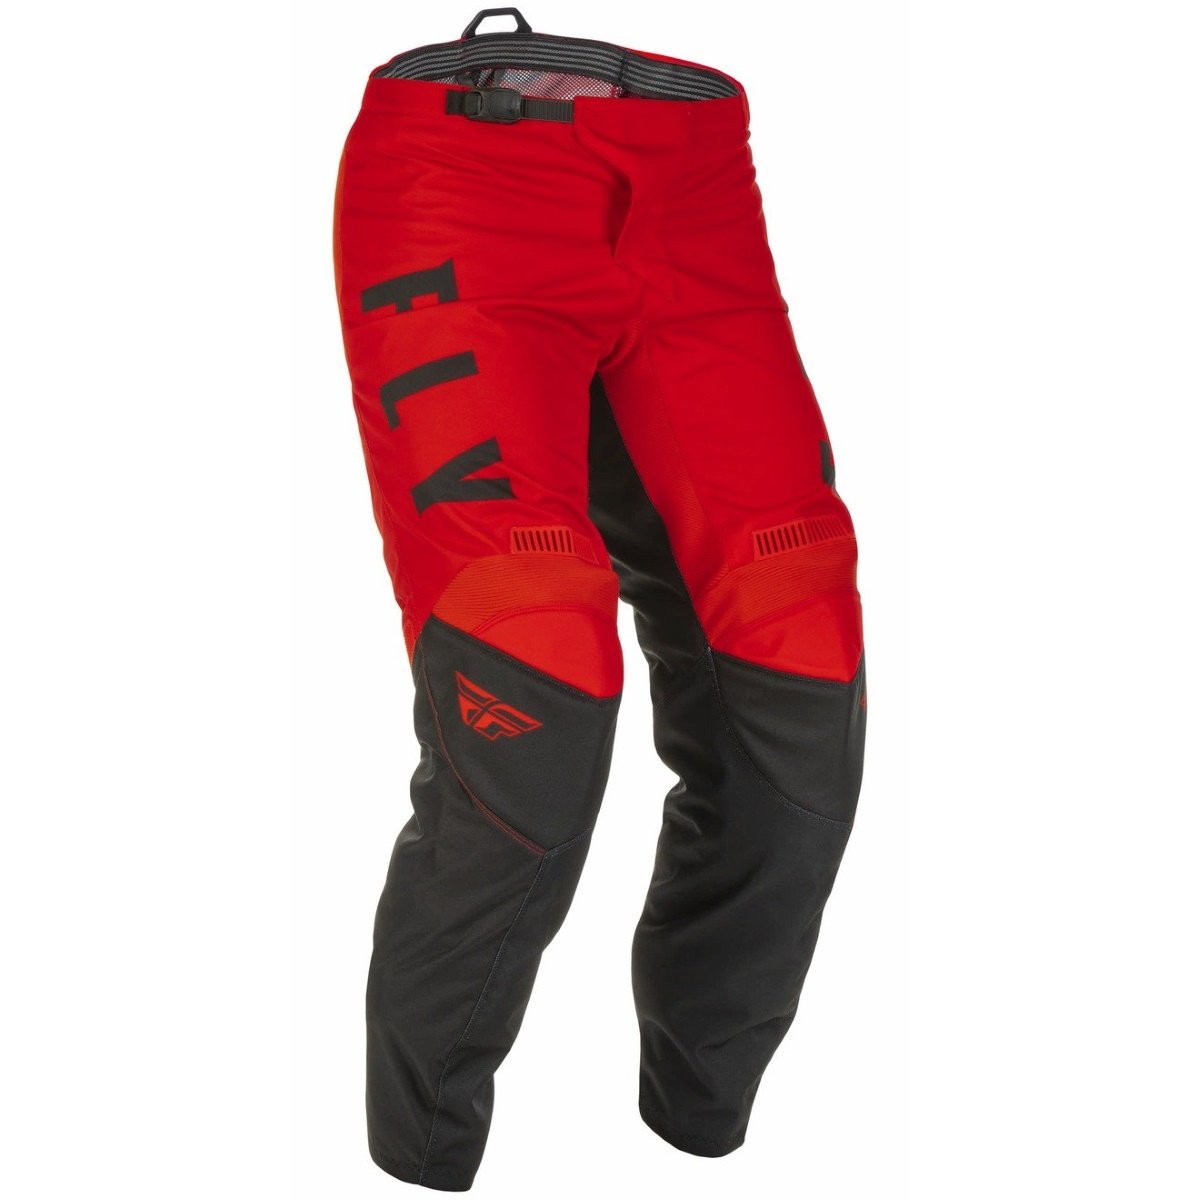 FLY RACING Kalhoty Youth F-16 2022 Red/Black 18